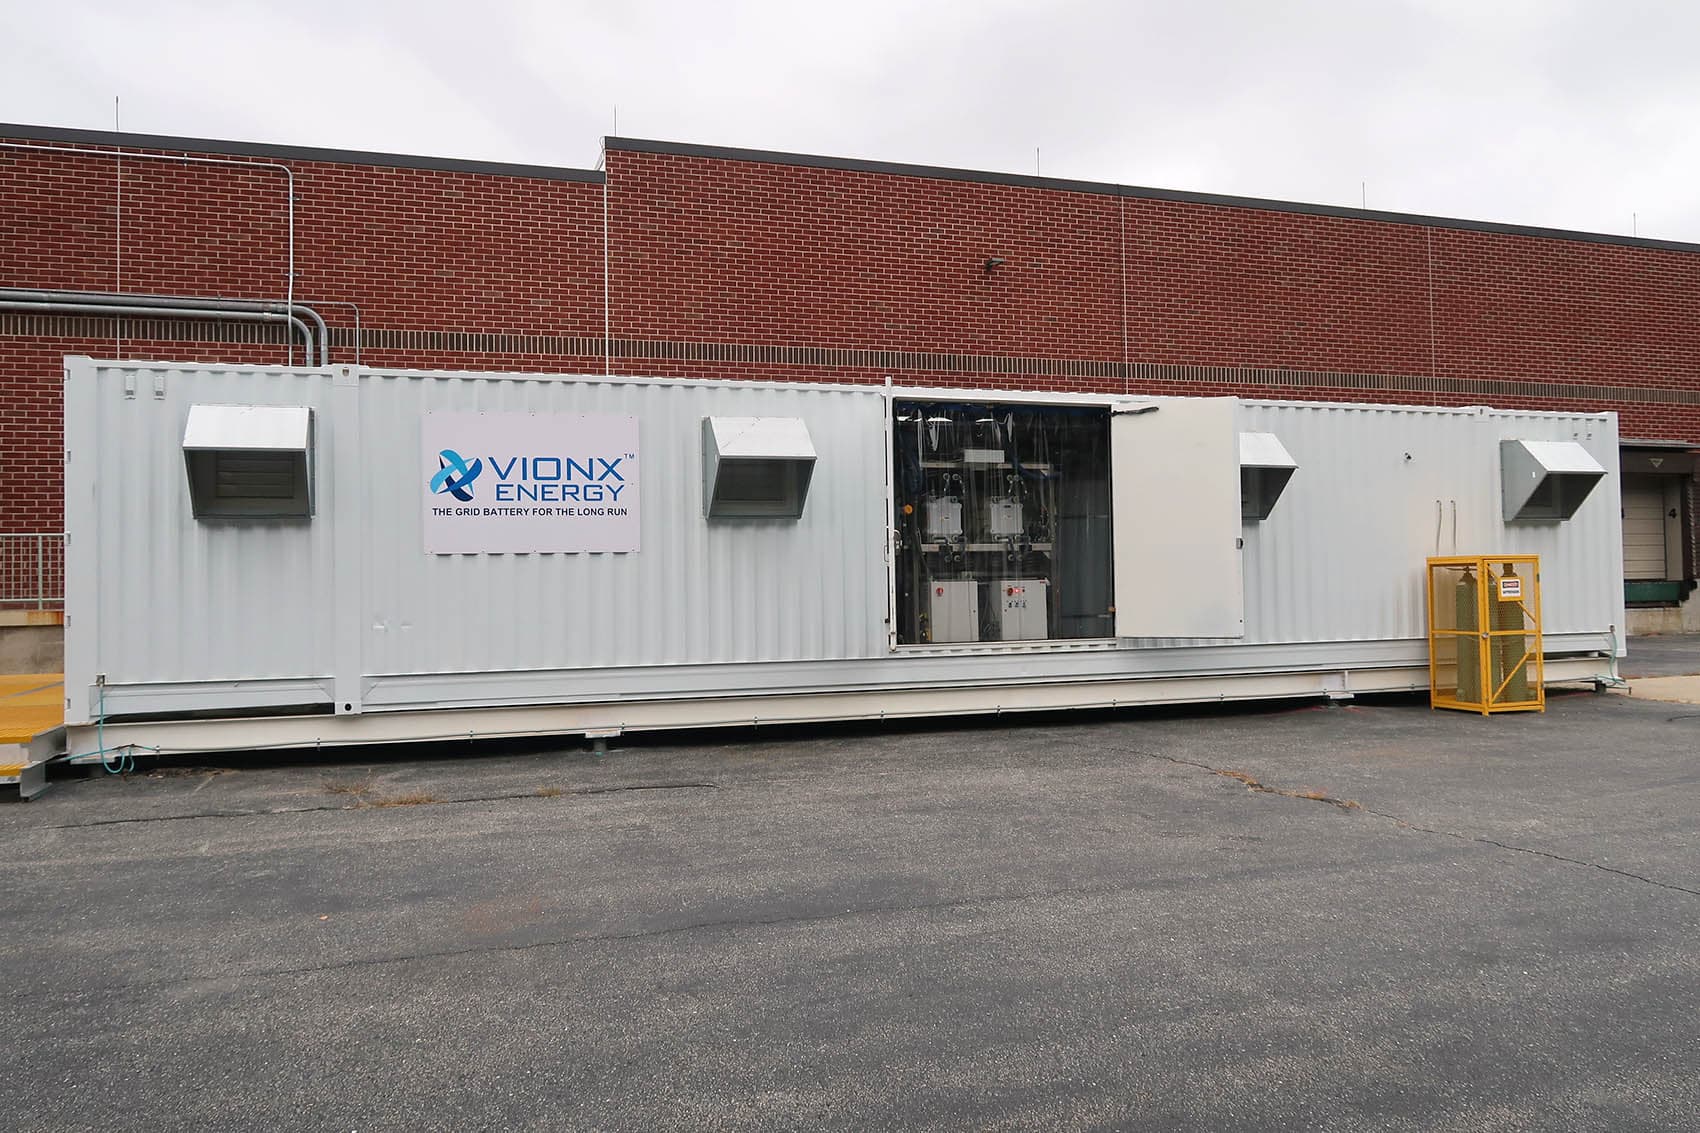 The Vionx vanadium redox flow battery which stores energy in liquid form behind the Army reserve at Fort Devens. (Bruce Gellerman/WBUR)